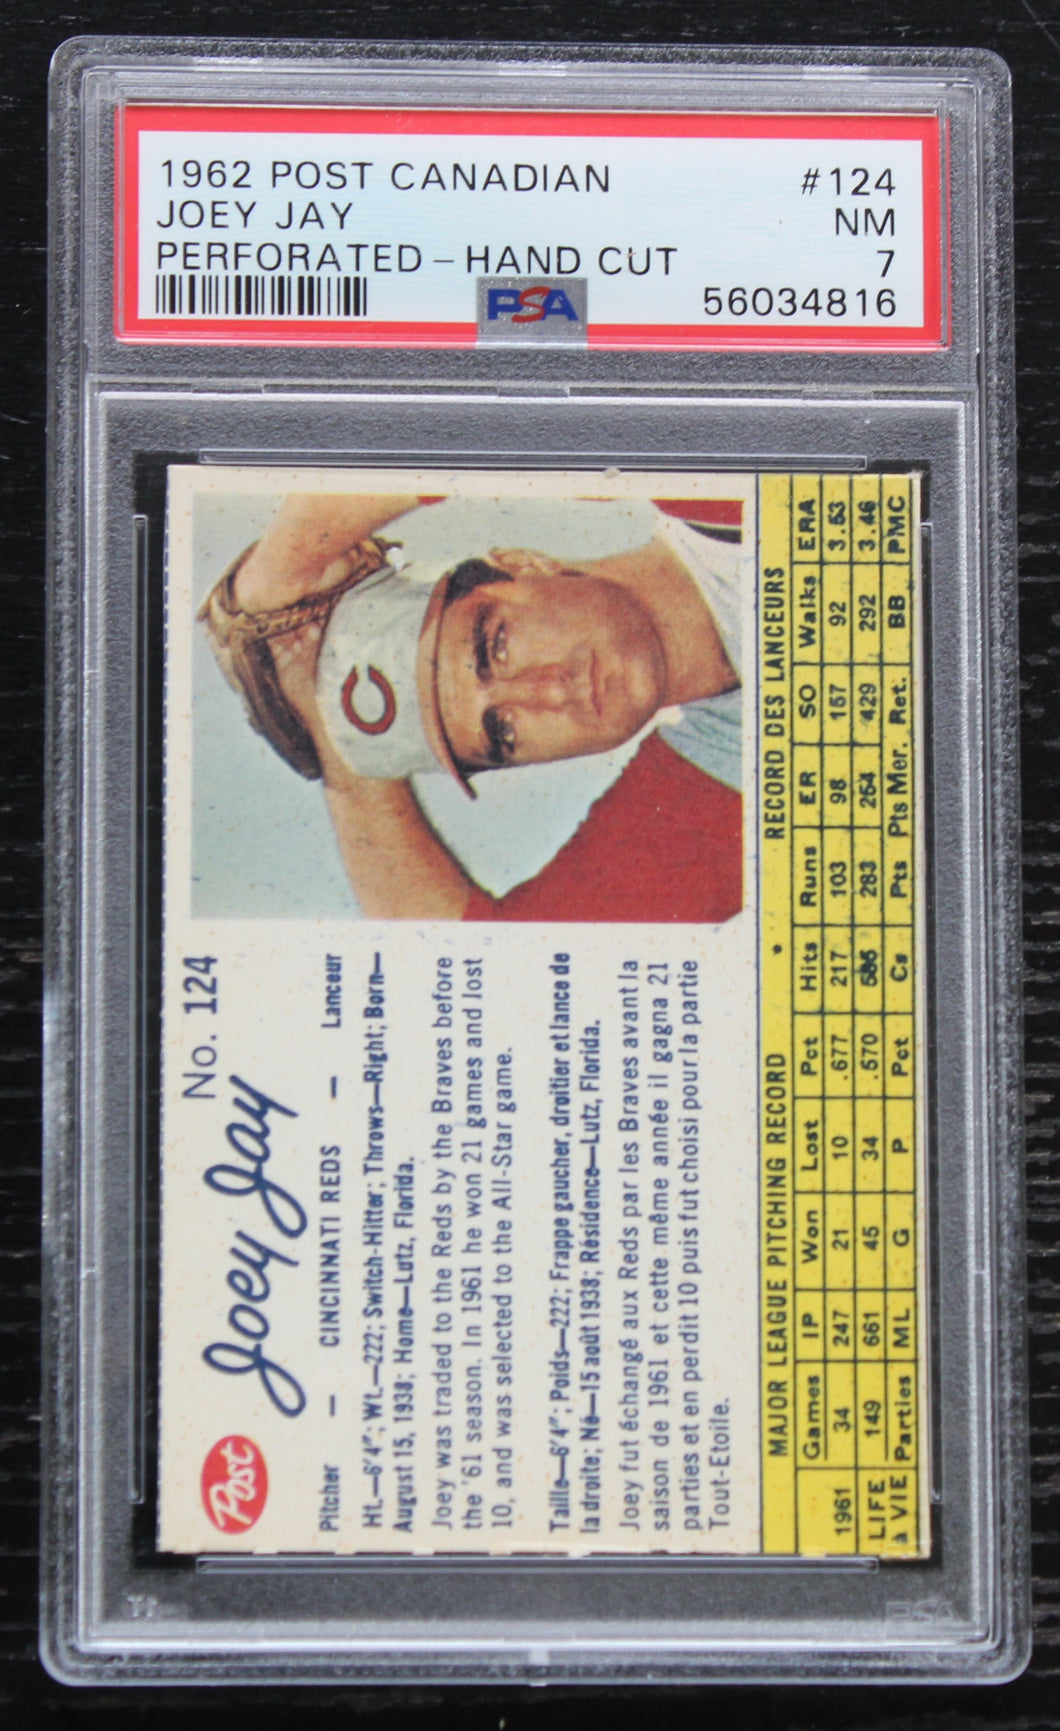 1962 Post Canadian Joey Jay Perforated - Hand Cut #124 PSA NM 7